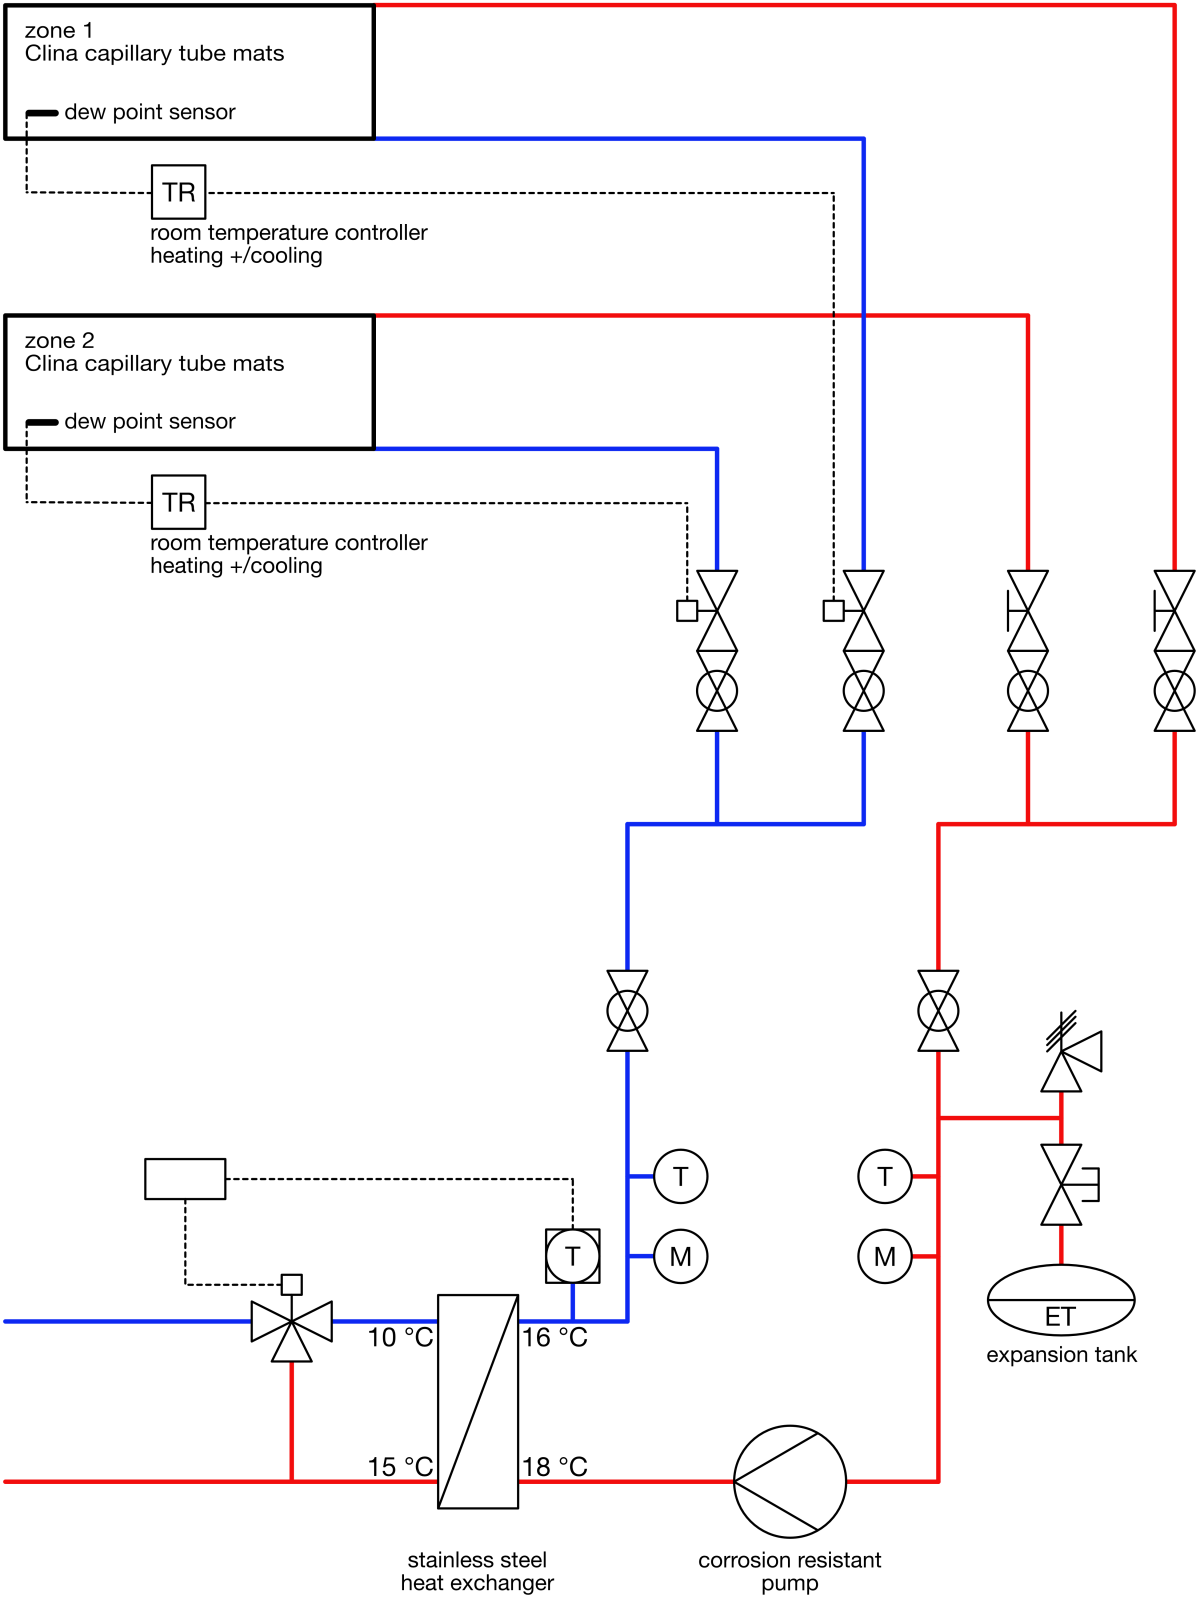 system and control schematic_cooling mode